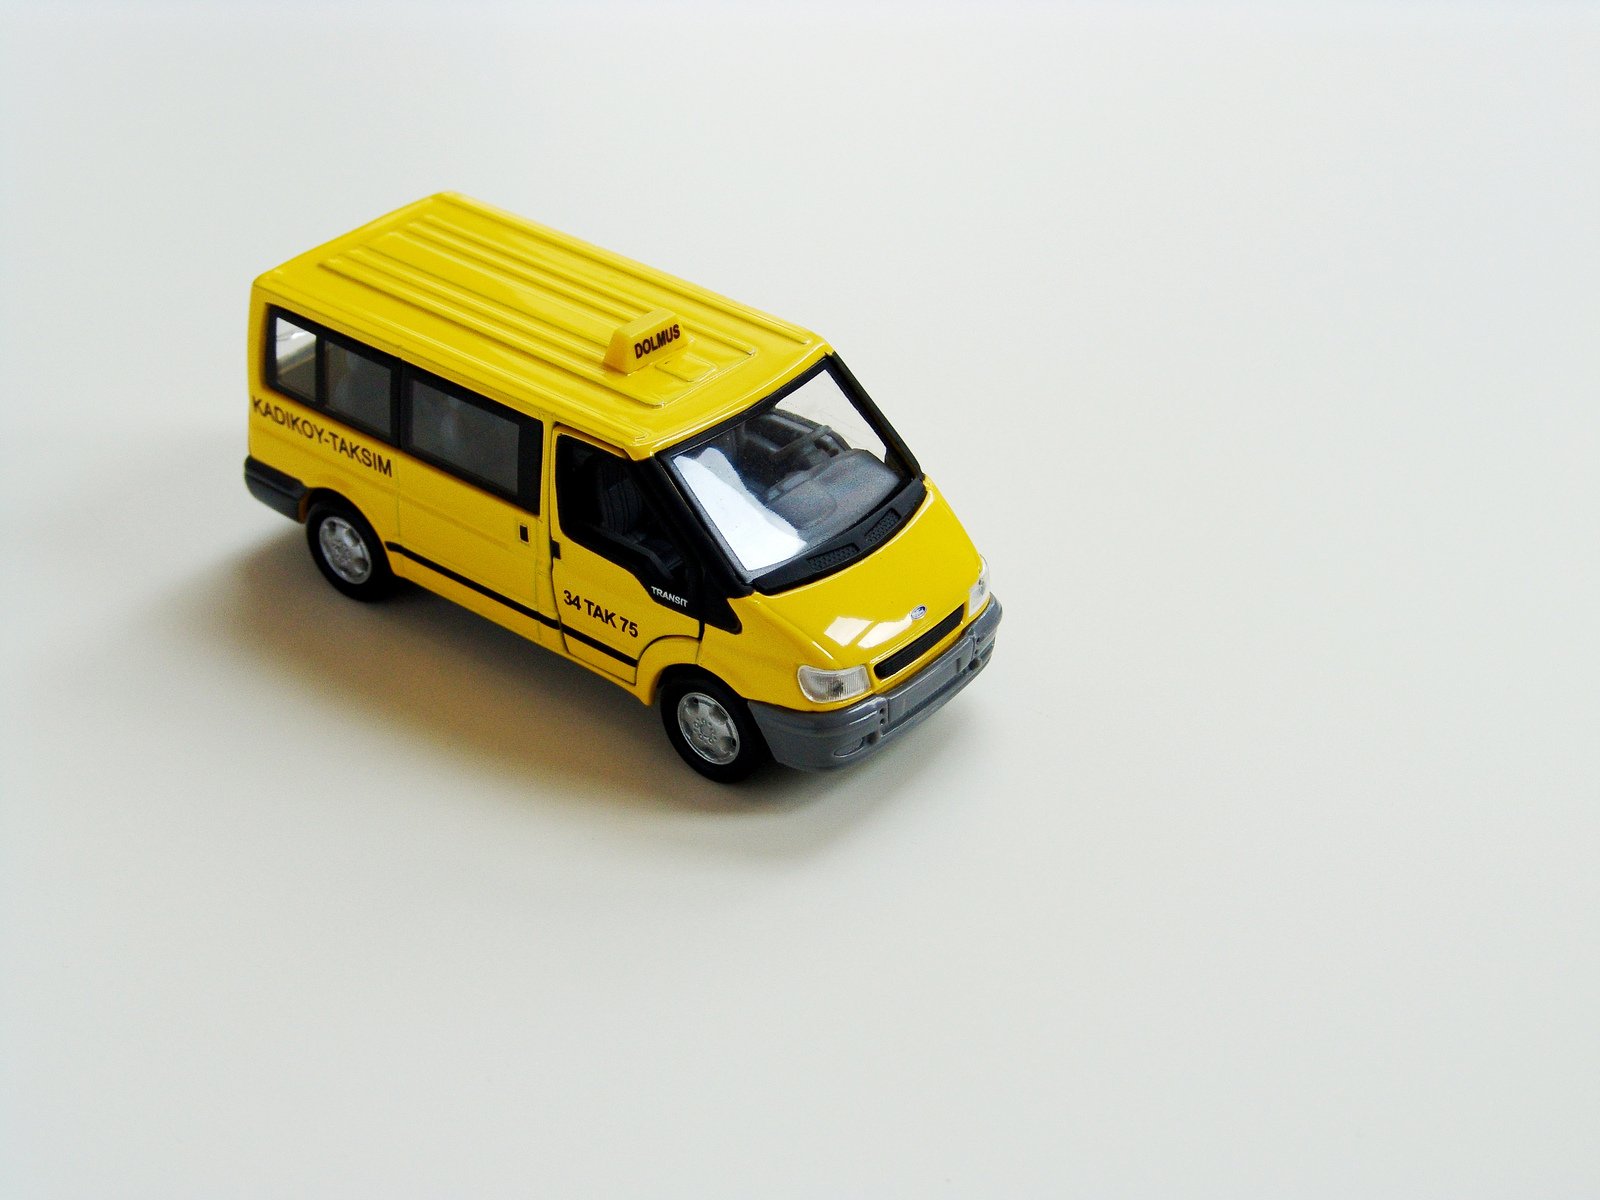 the toy bus is sitting on a table